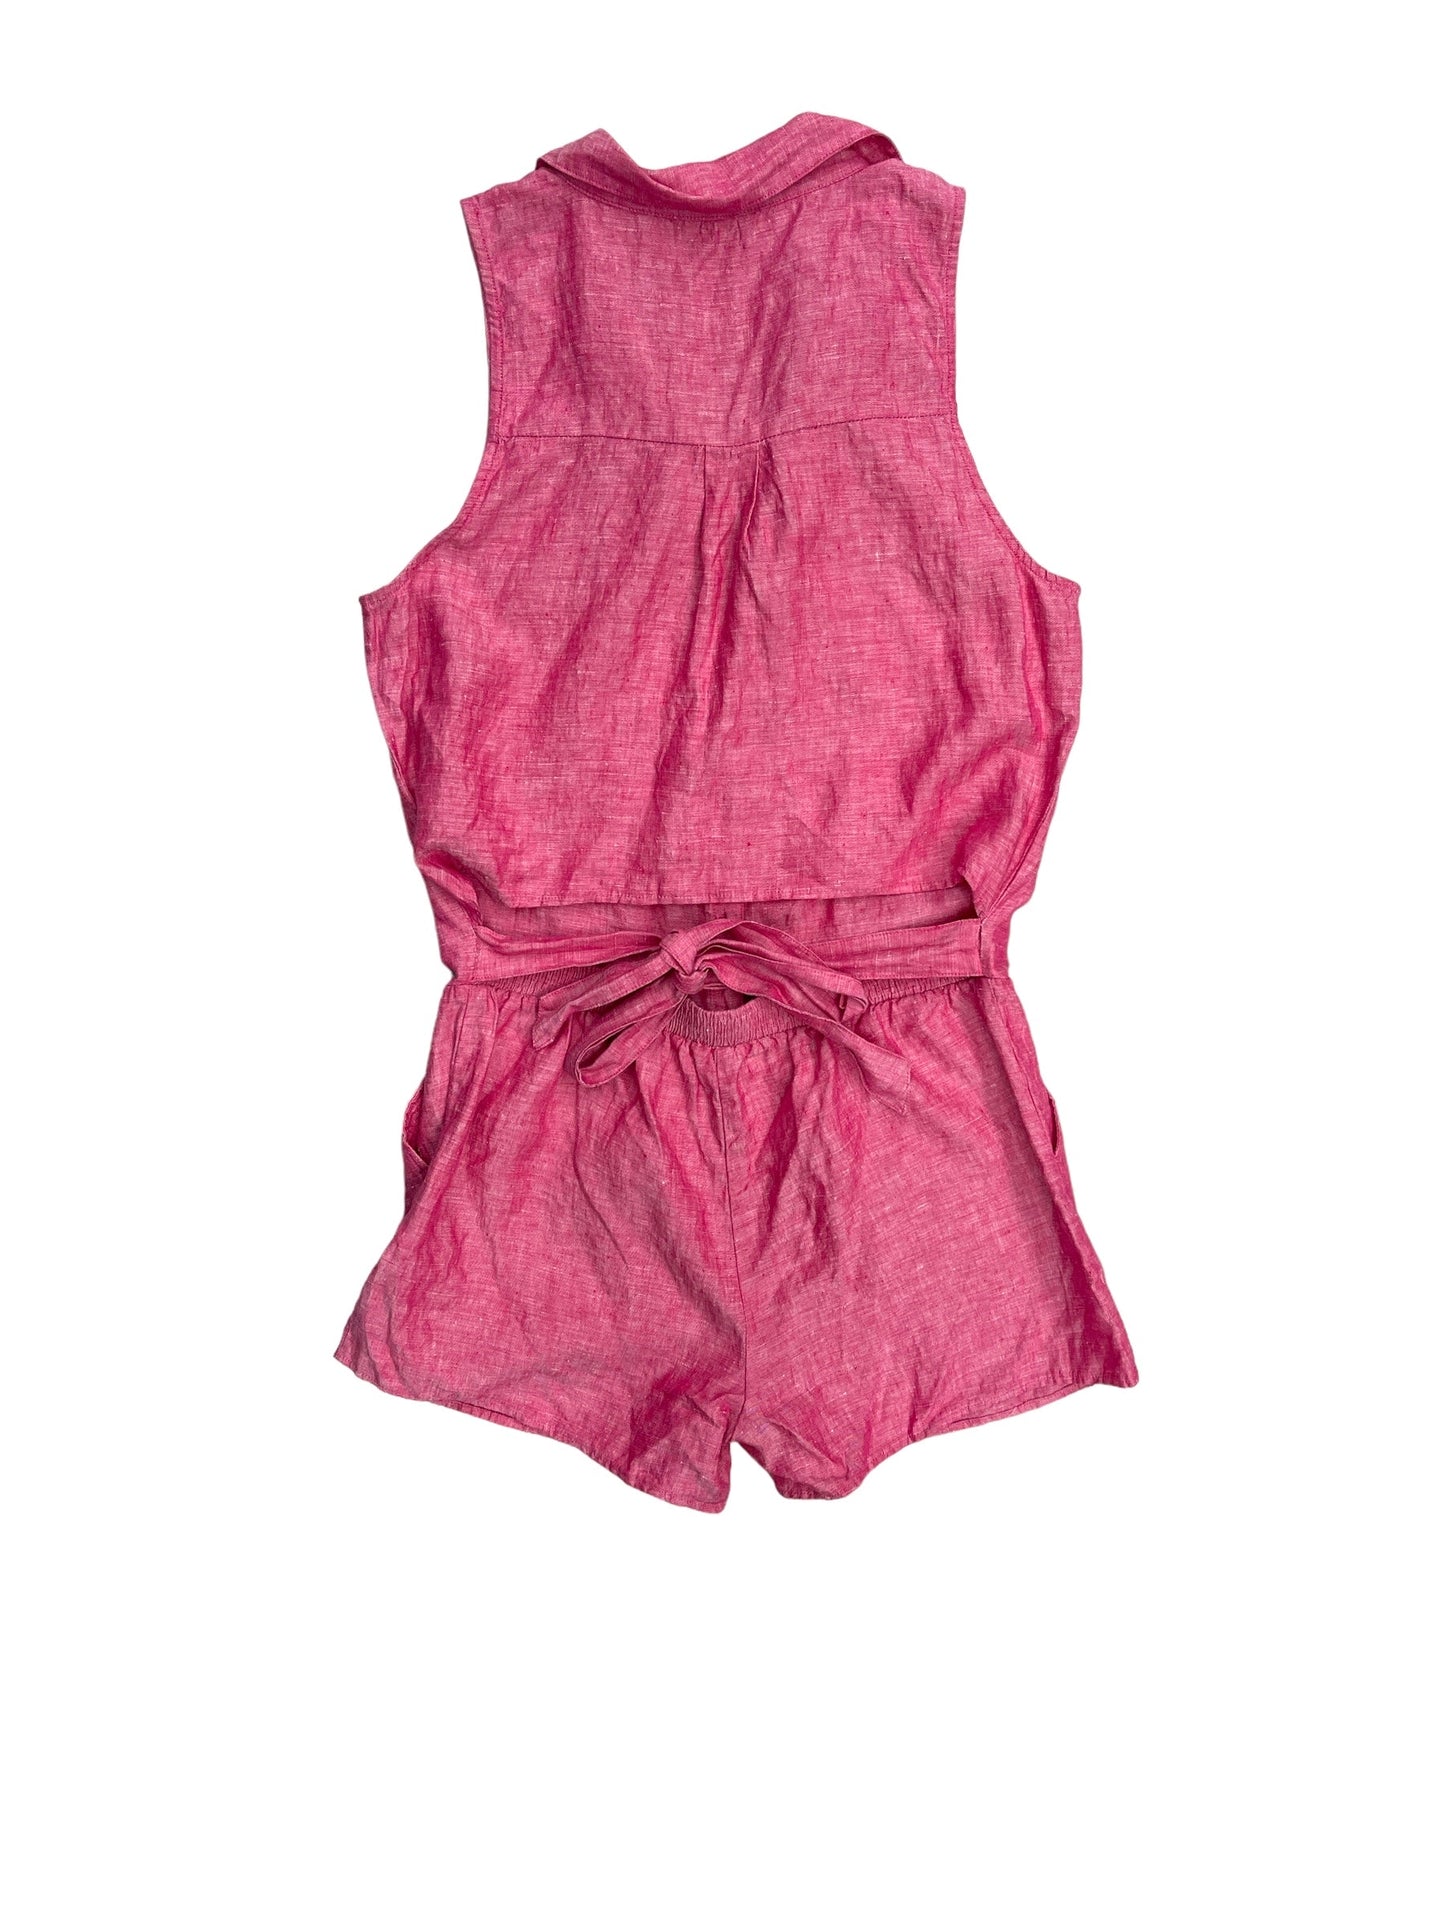 Romper By Joie  Size: S